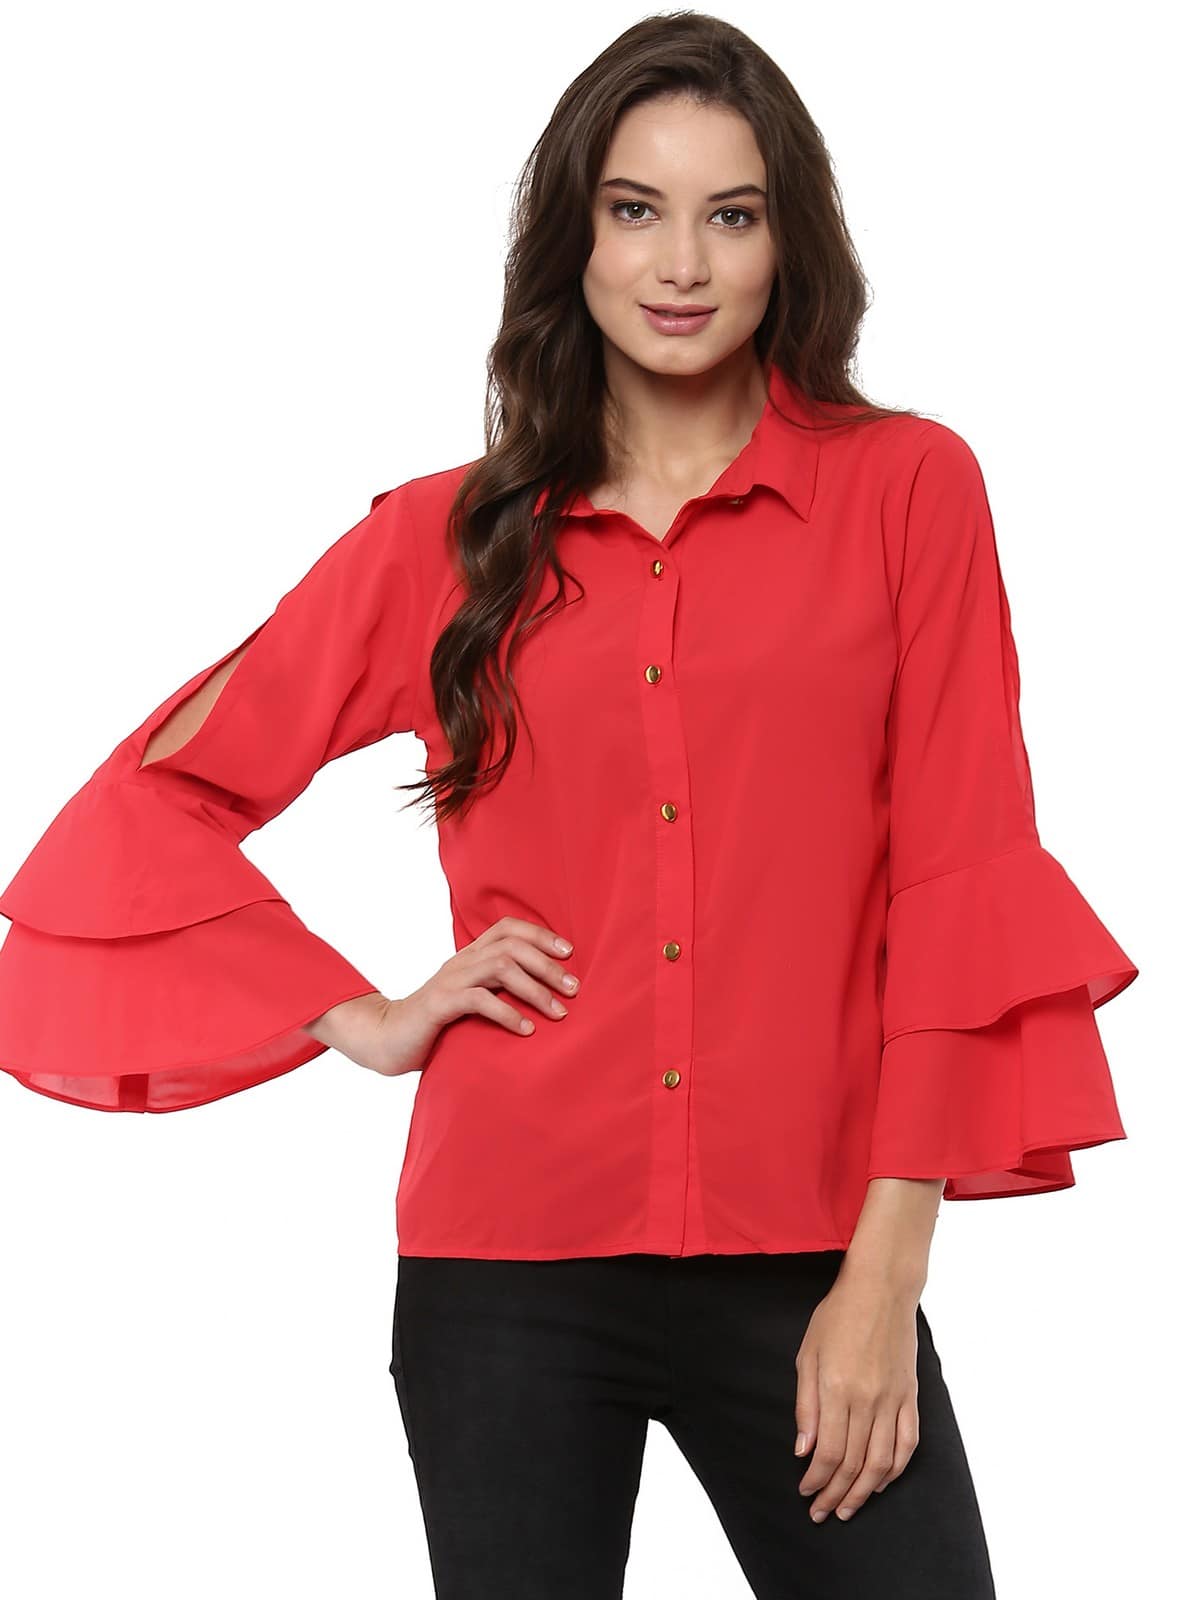 Women's Loose Shirt With Bell Sleeves - Pannkh